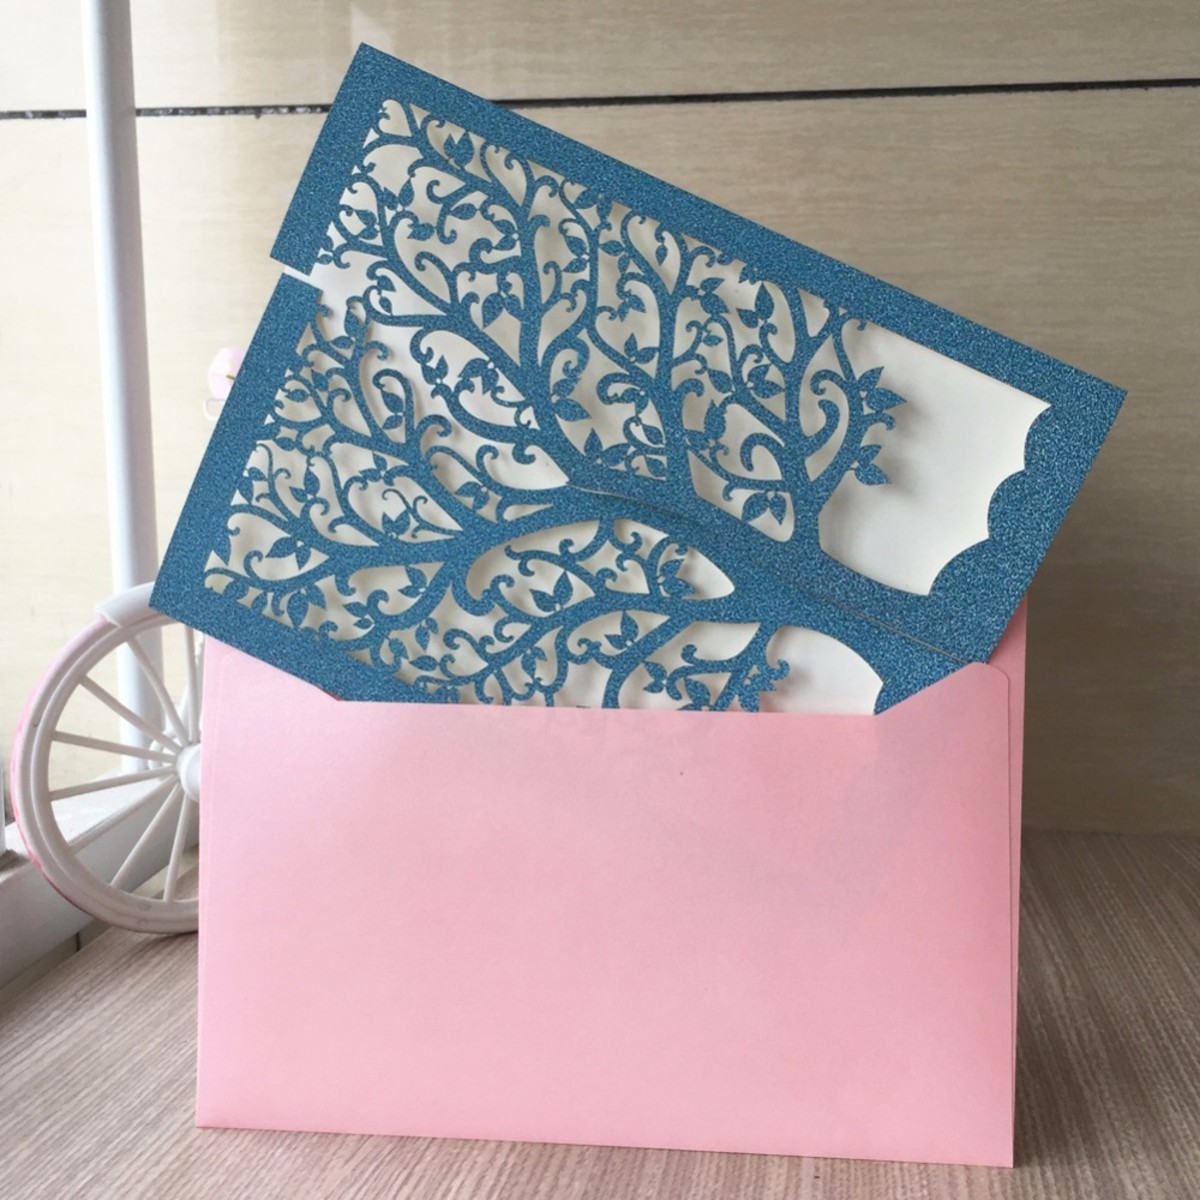 The best mail to send and receive is personalized greeting cards